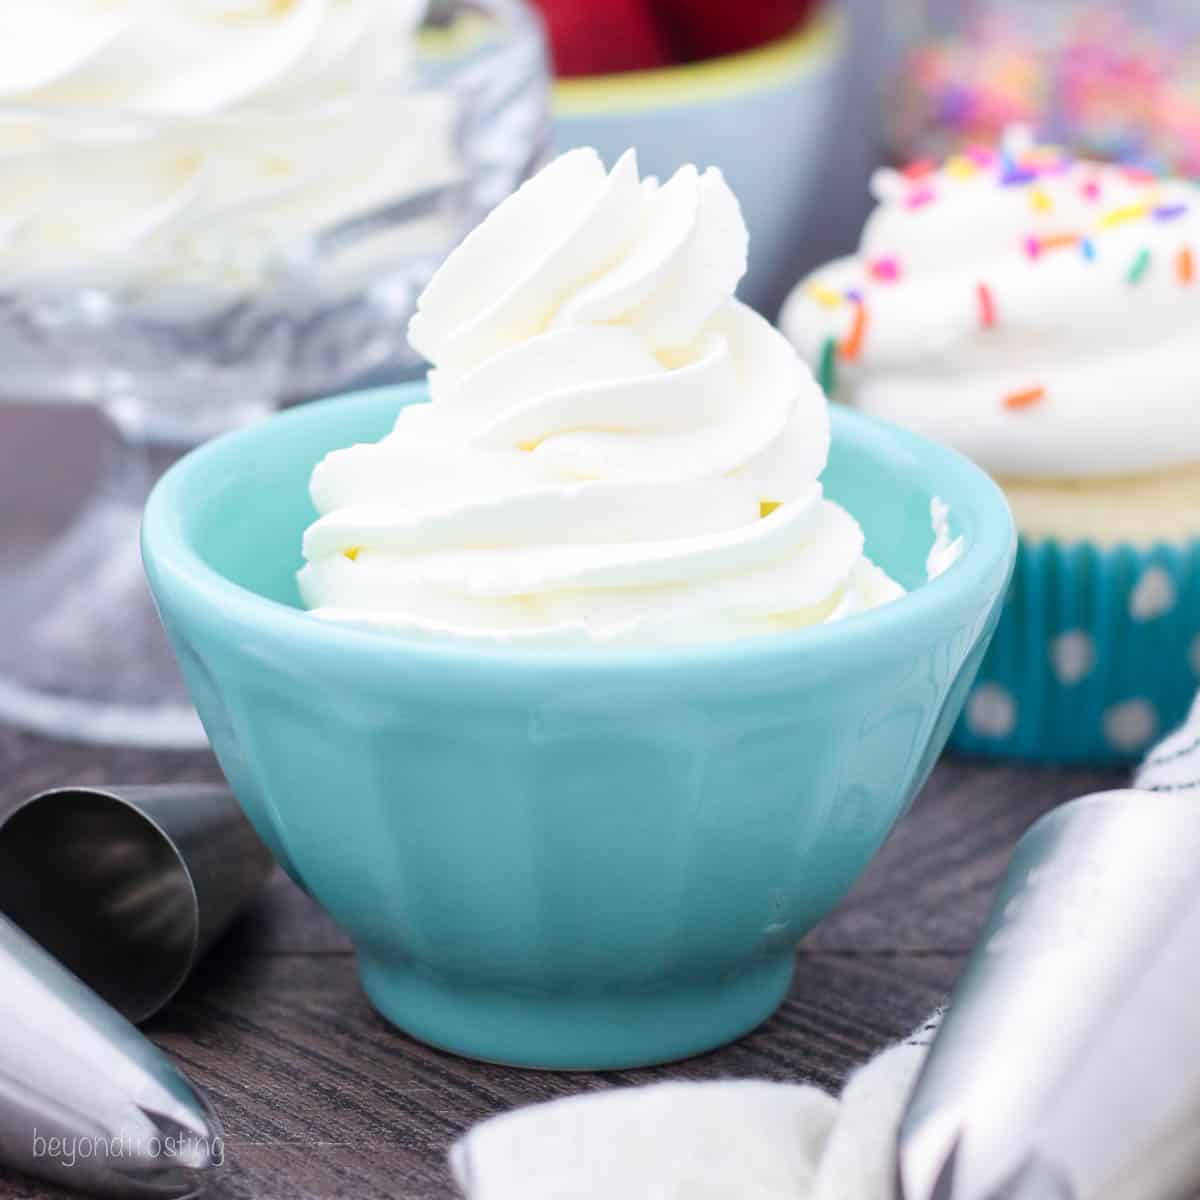 https://beyondfrosting.com/wp-content/uploads/2018/05/How-to-Make-Whipped-Cream-024-2.jpg